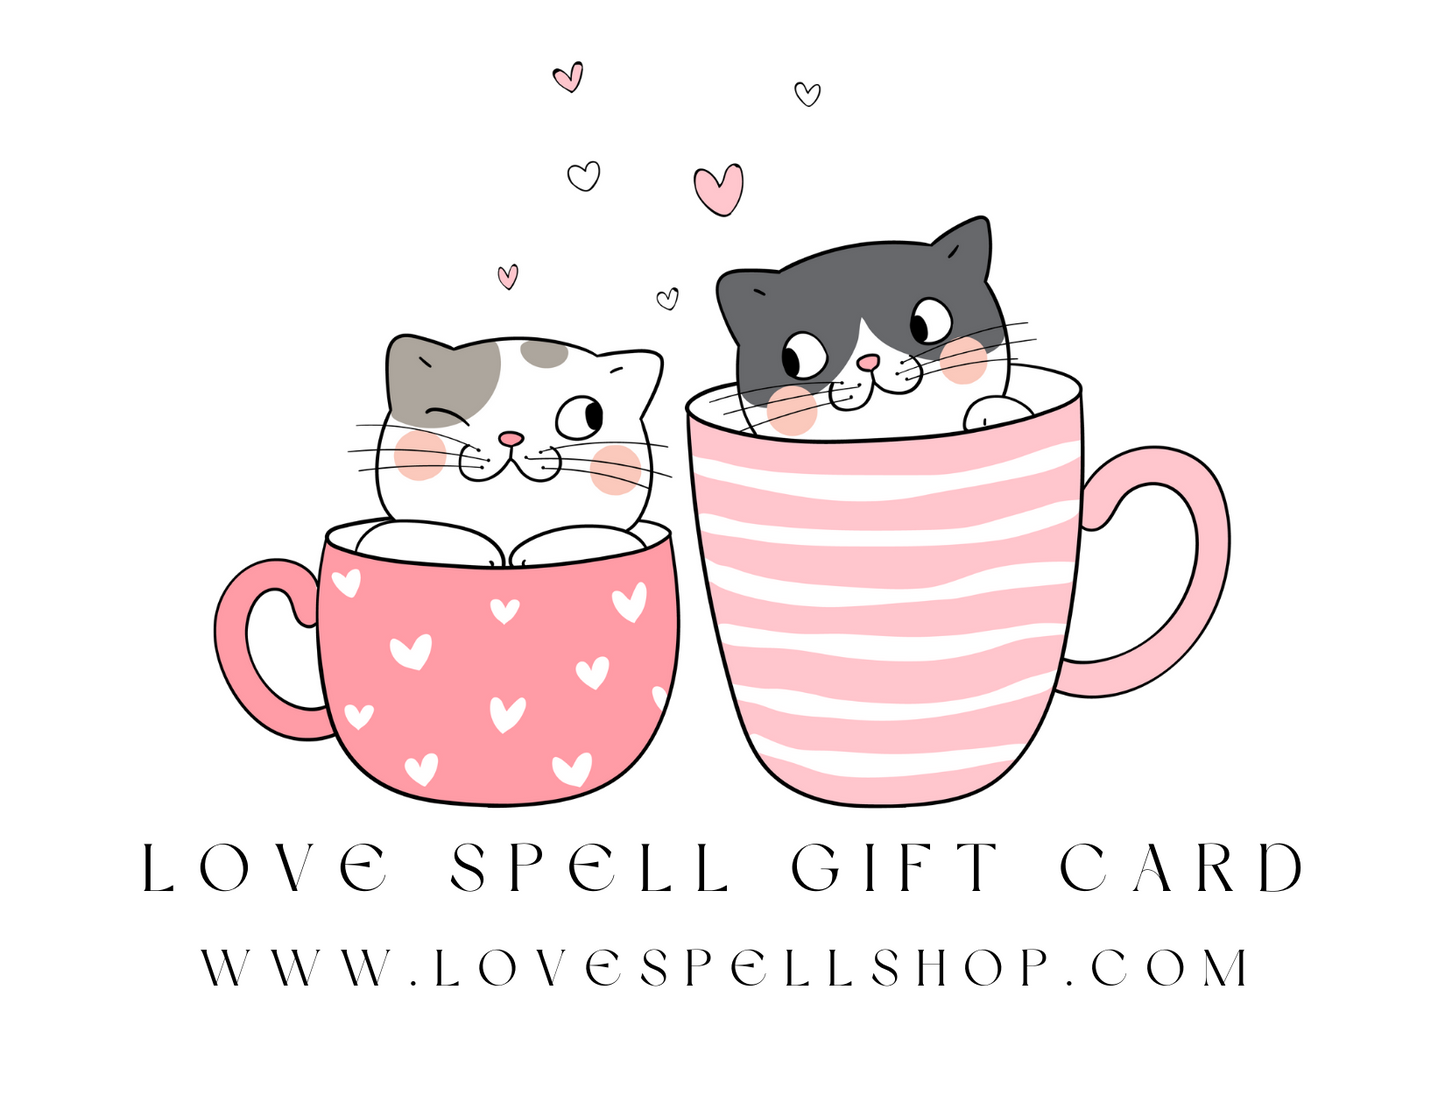 Love Spell Digital Gift Card (Cats in Tea Cups)